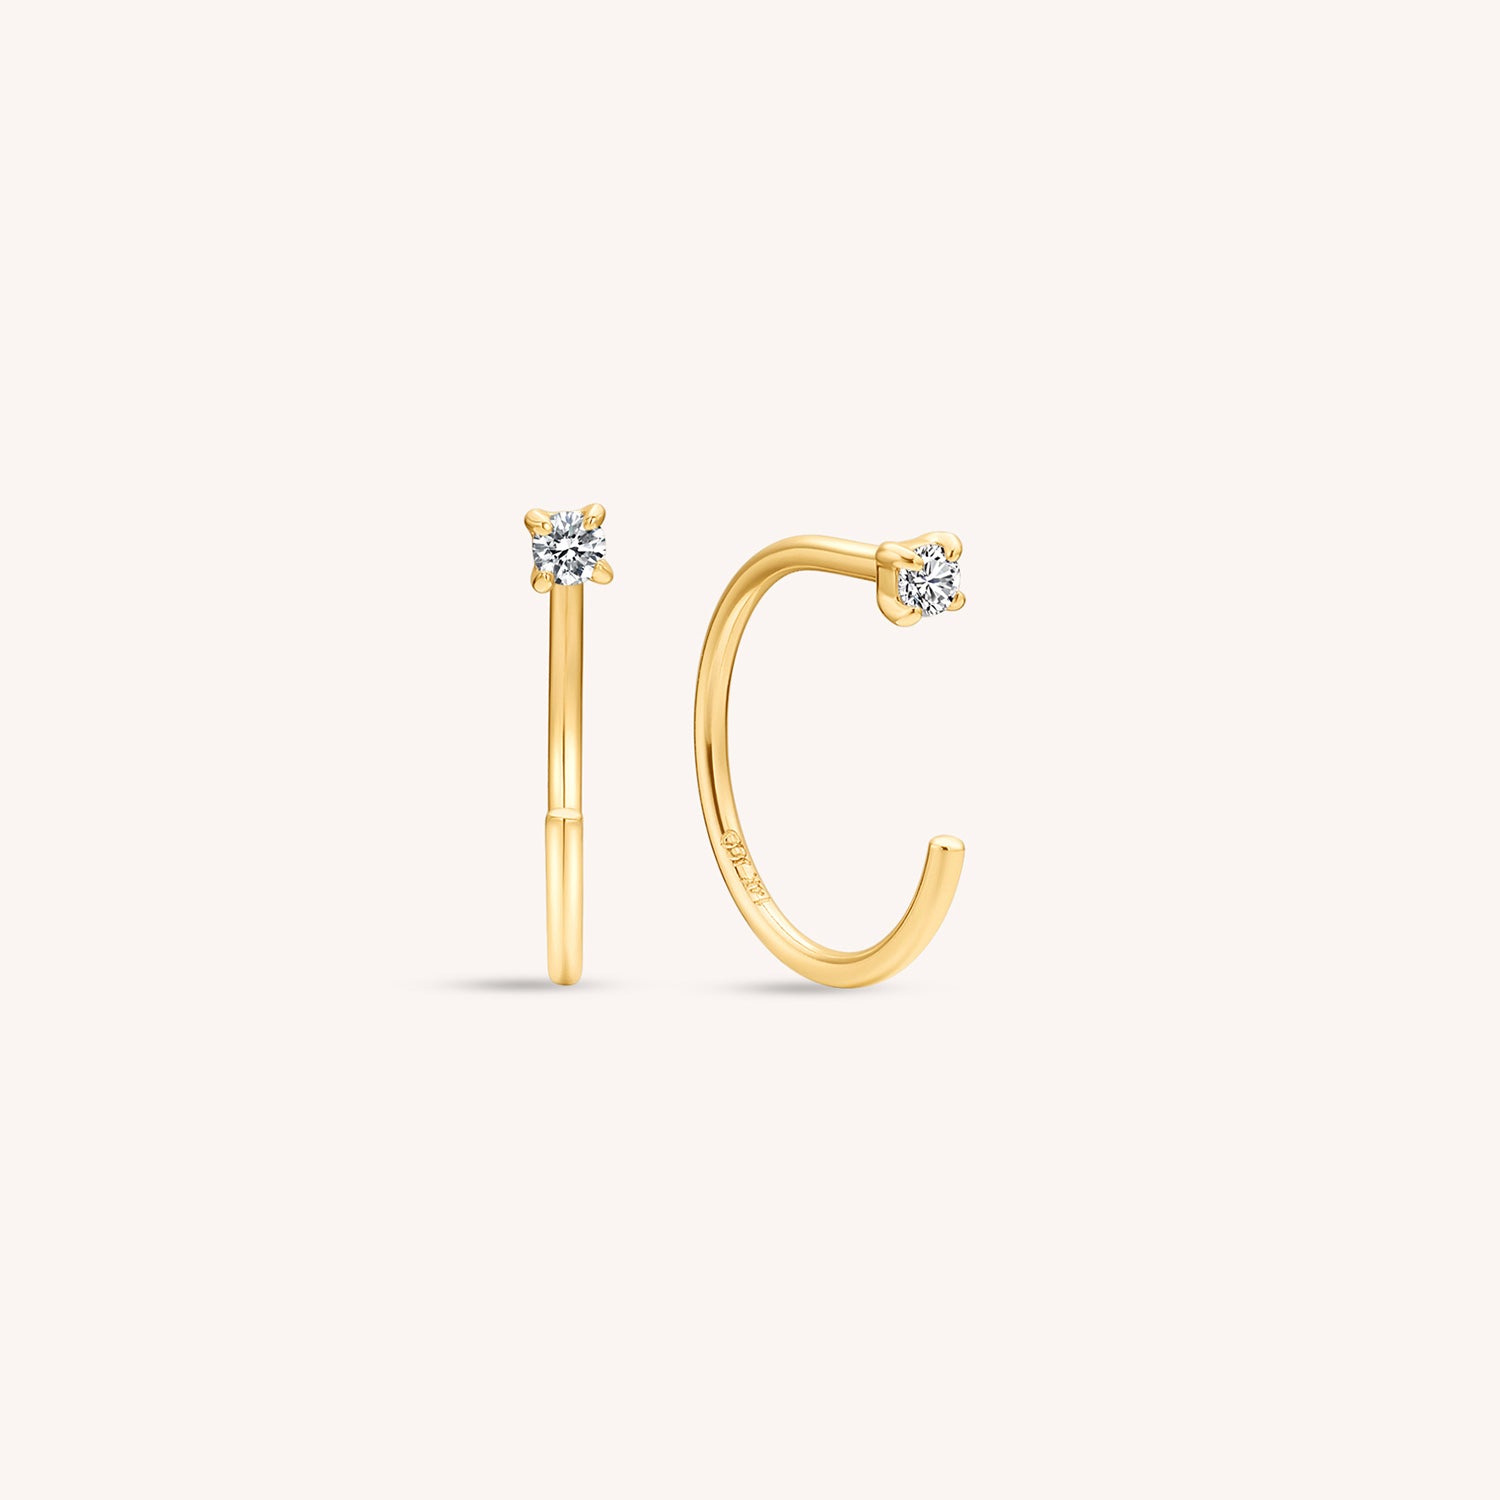 J&CO Jewellery 14K Solid Gold Timeless Link Small Hoop Earrings Yellow Gold